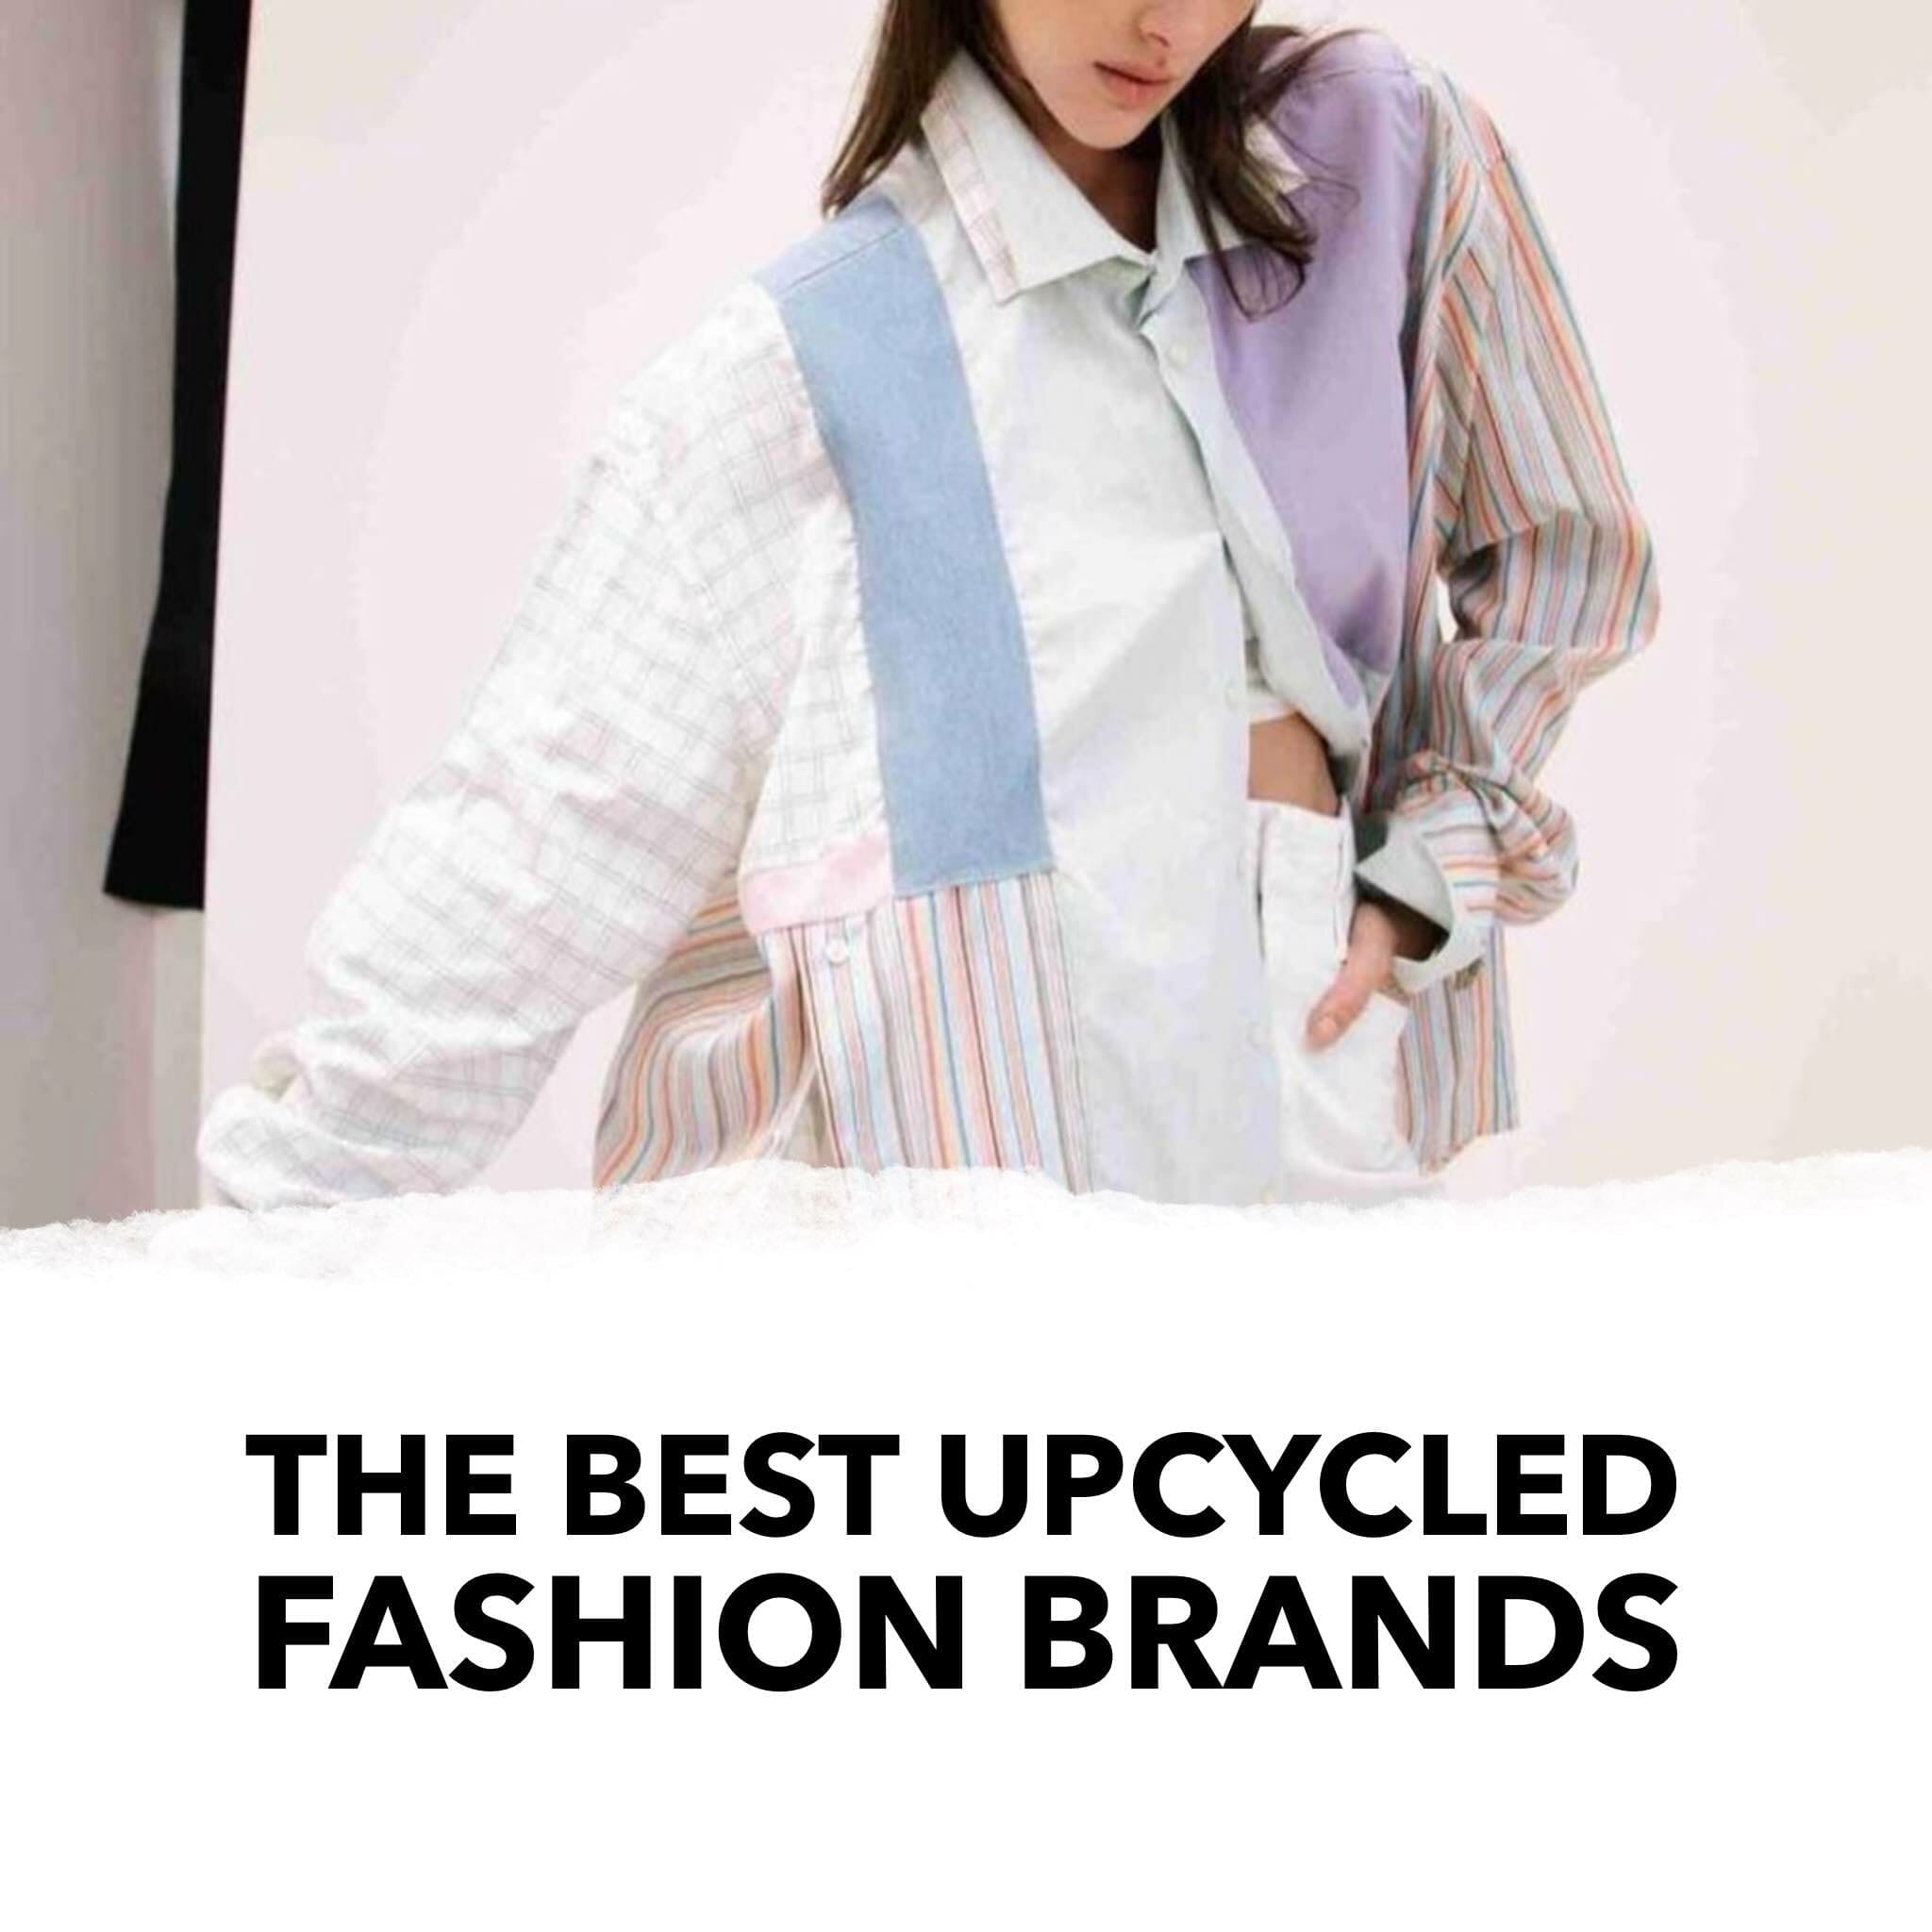 The best upcycled fashion brands